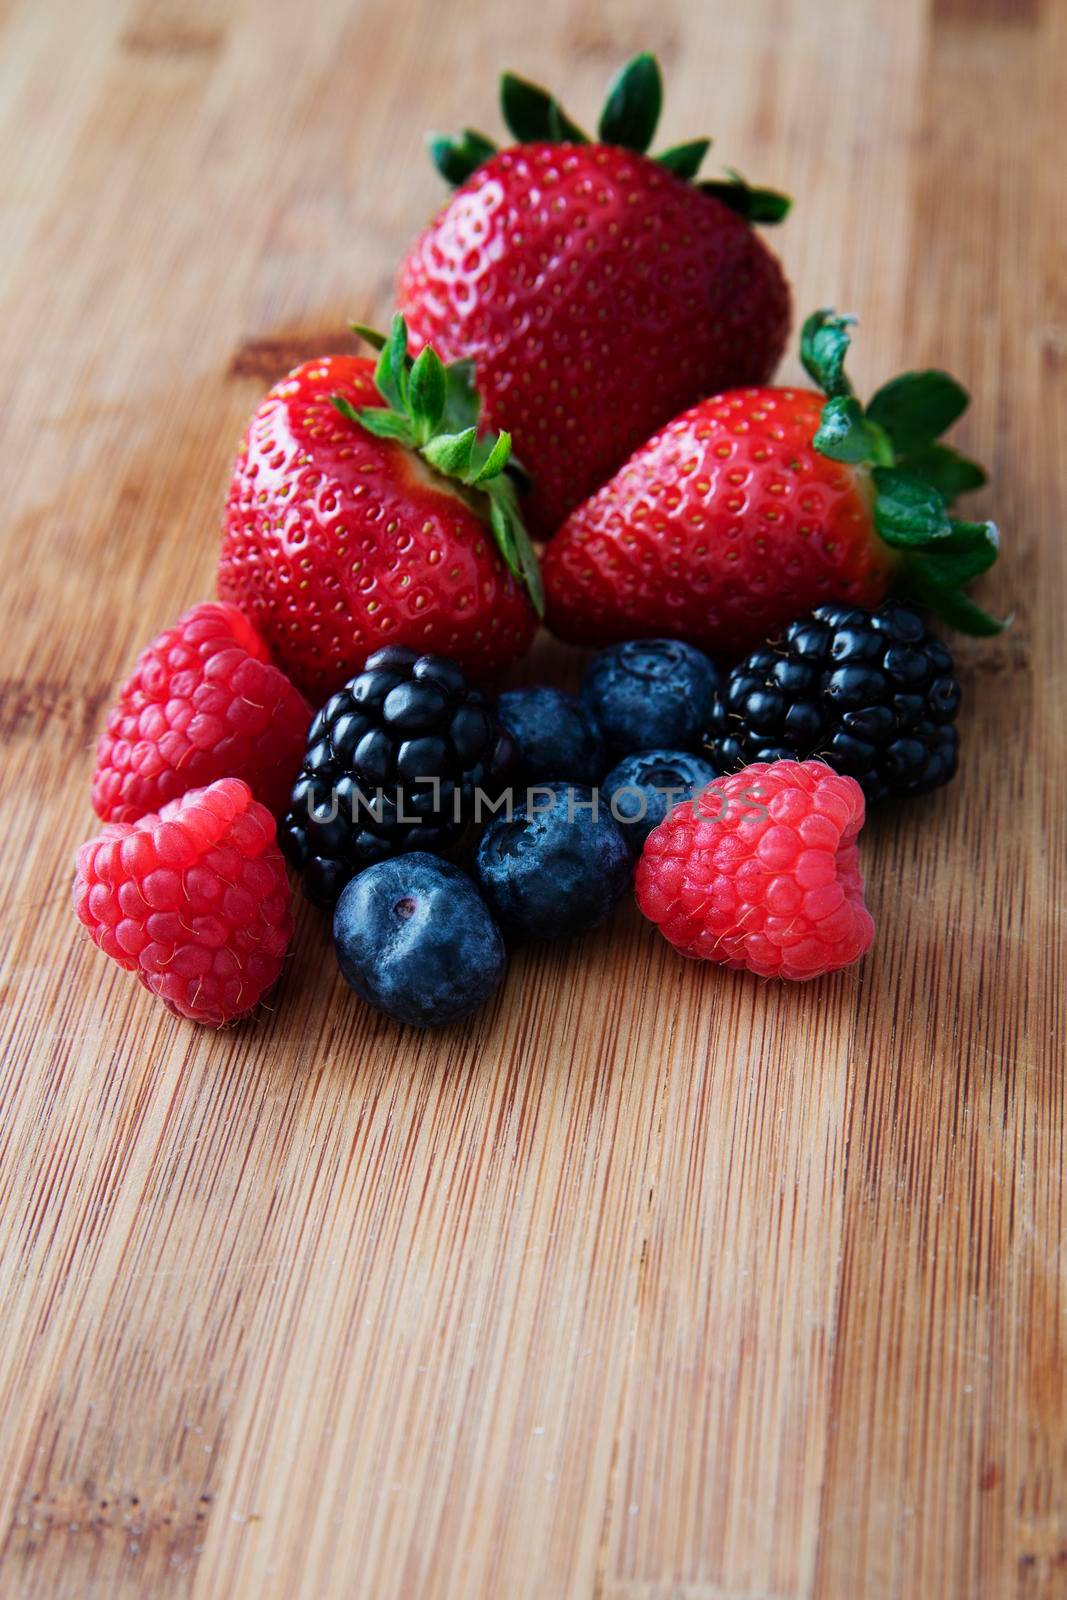 Fresh strawberries, blueberries and blackberries on a wooden cutting board